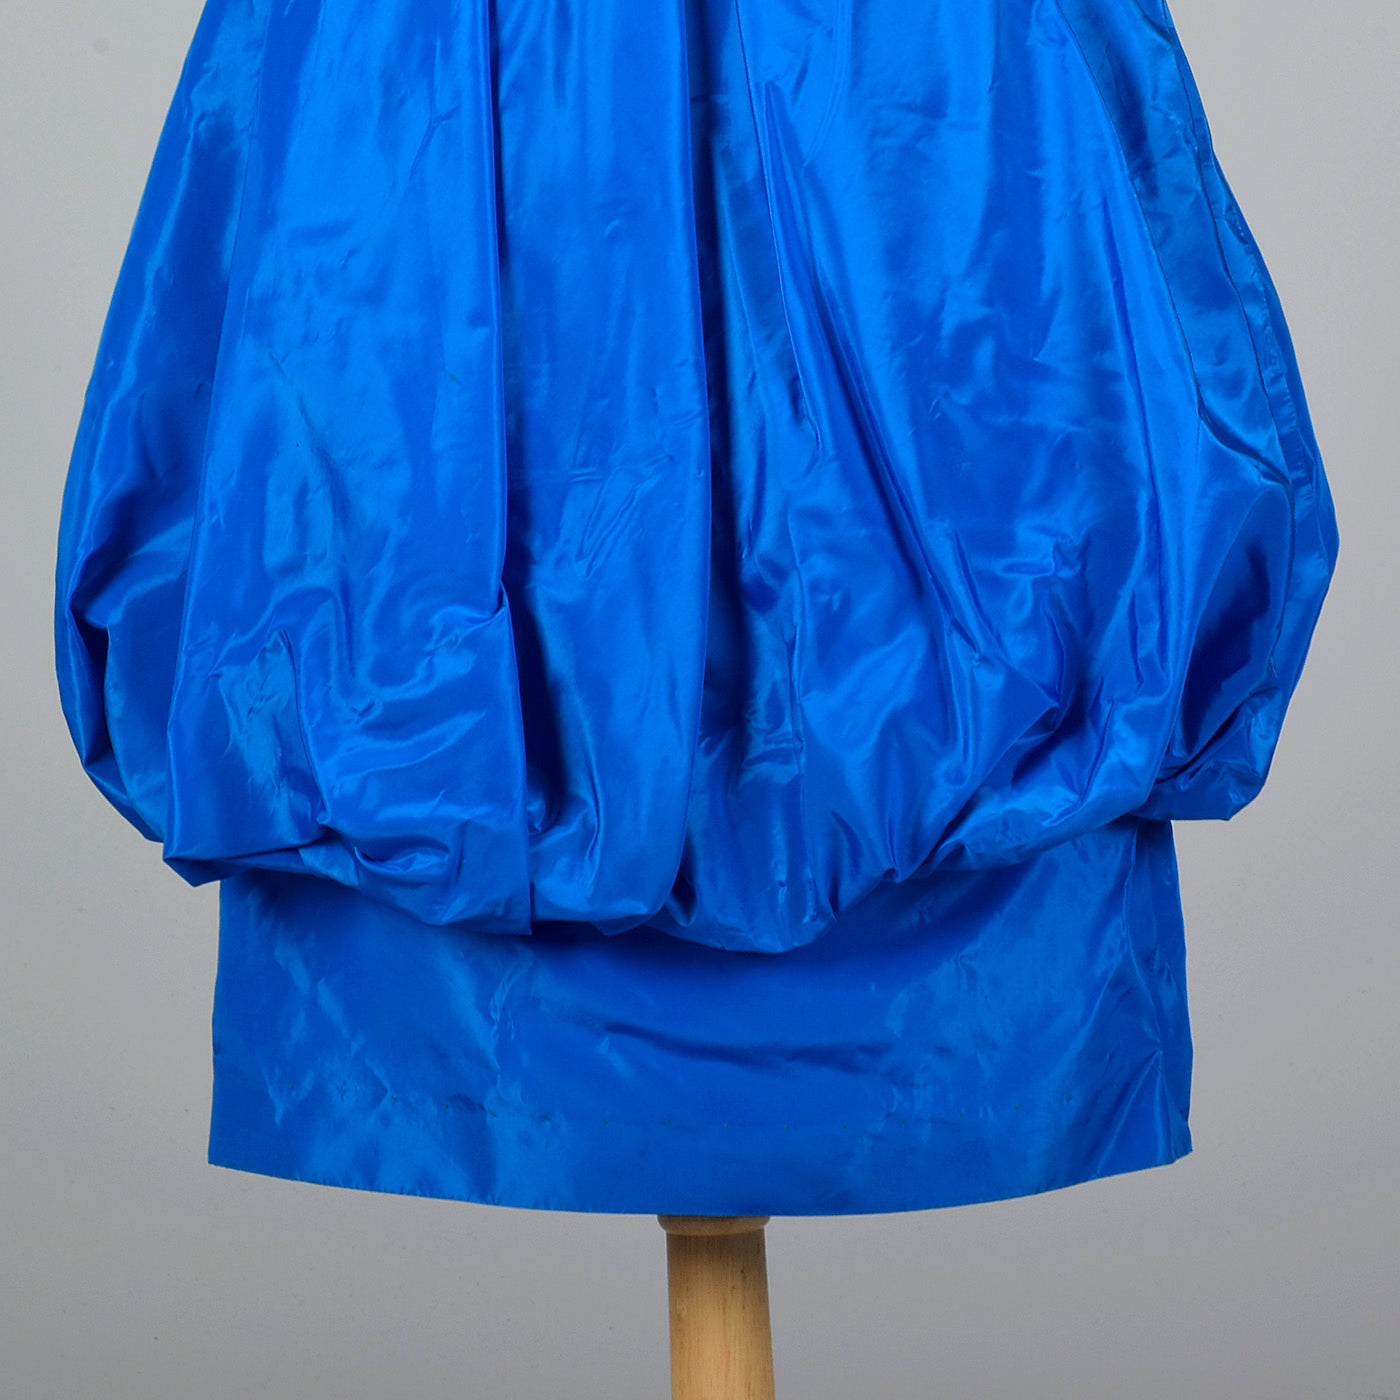 1950s Electric Blue Party Dress with Bubble Skirt